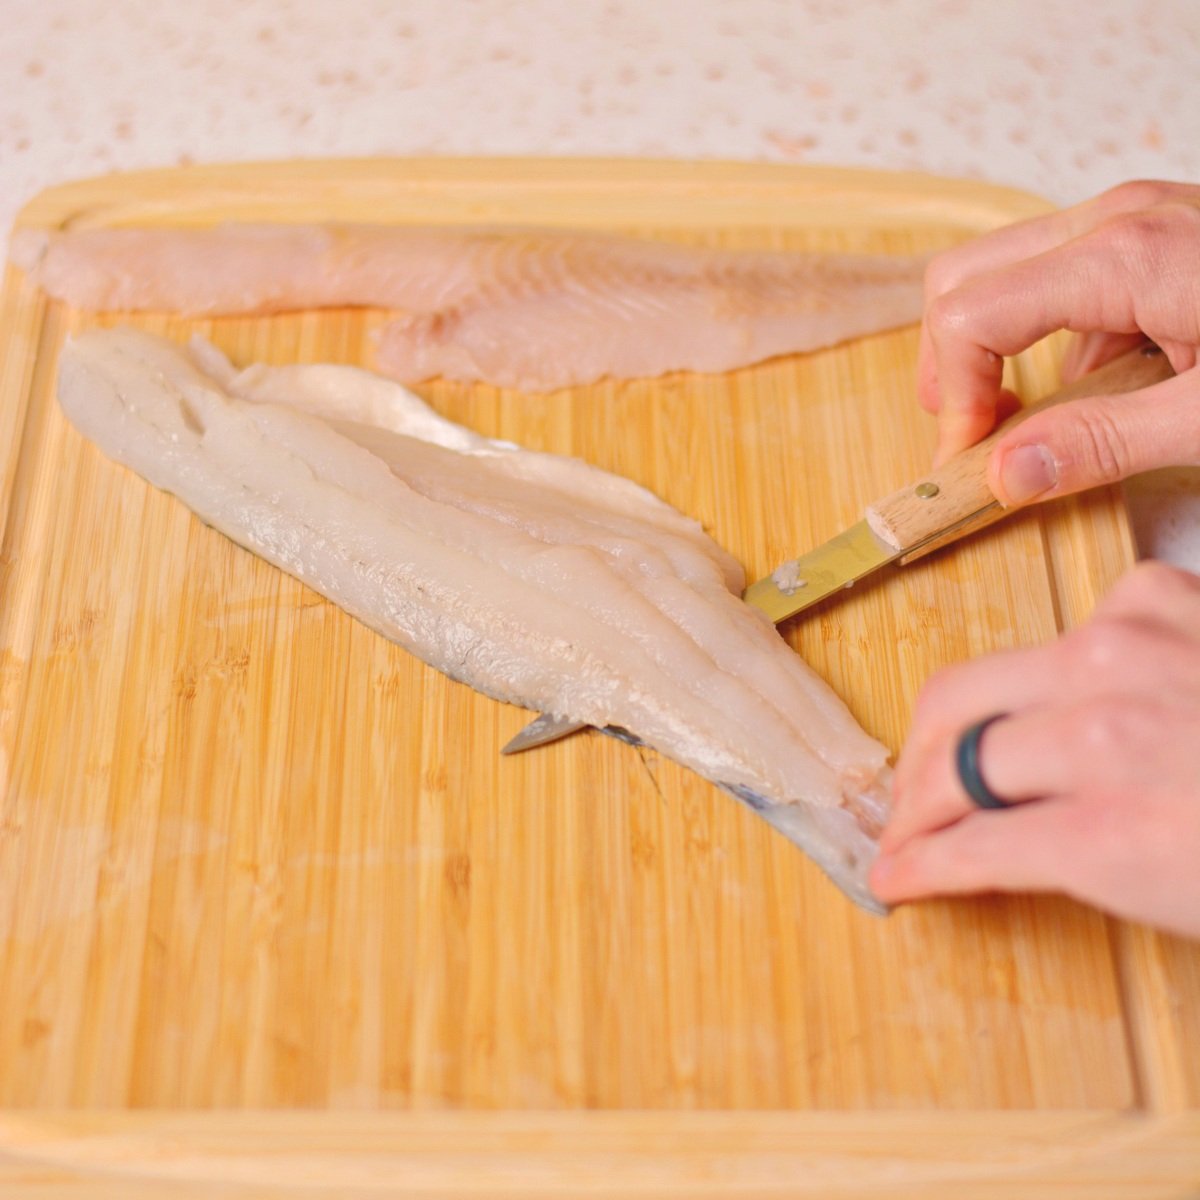 Cutting the skin off of a walleye fillet.